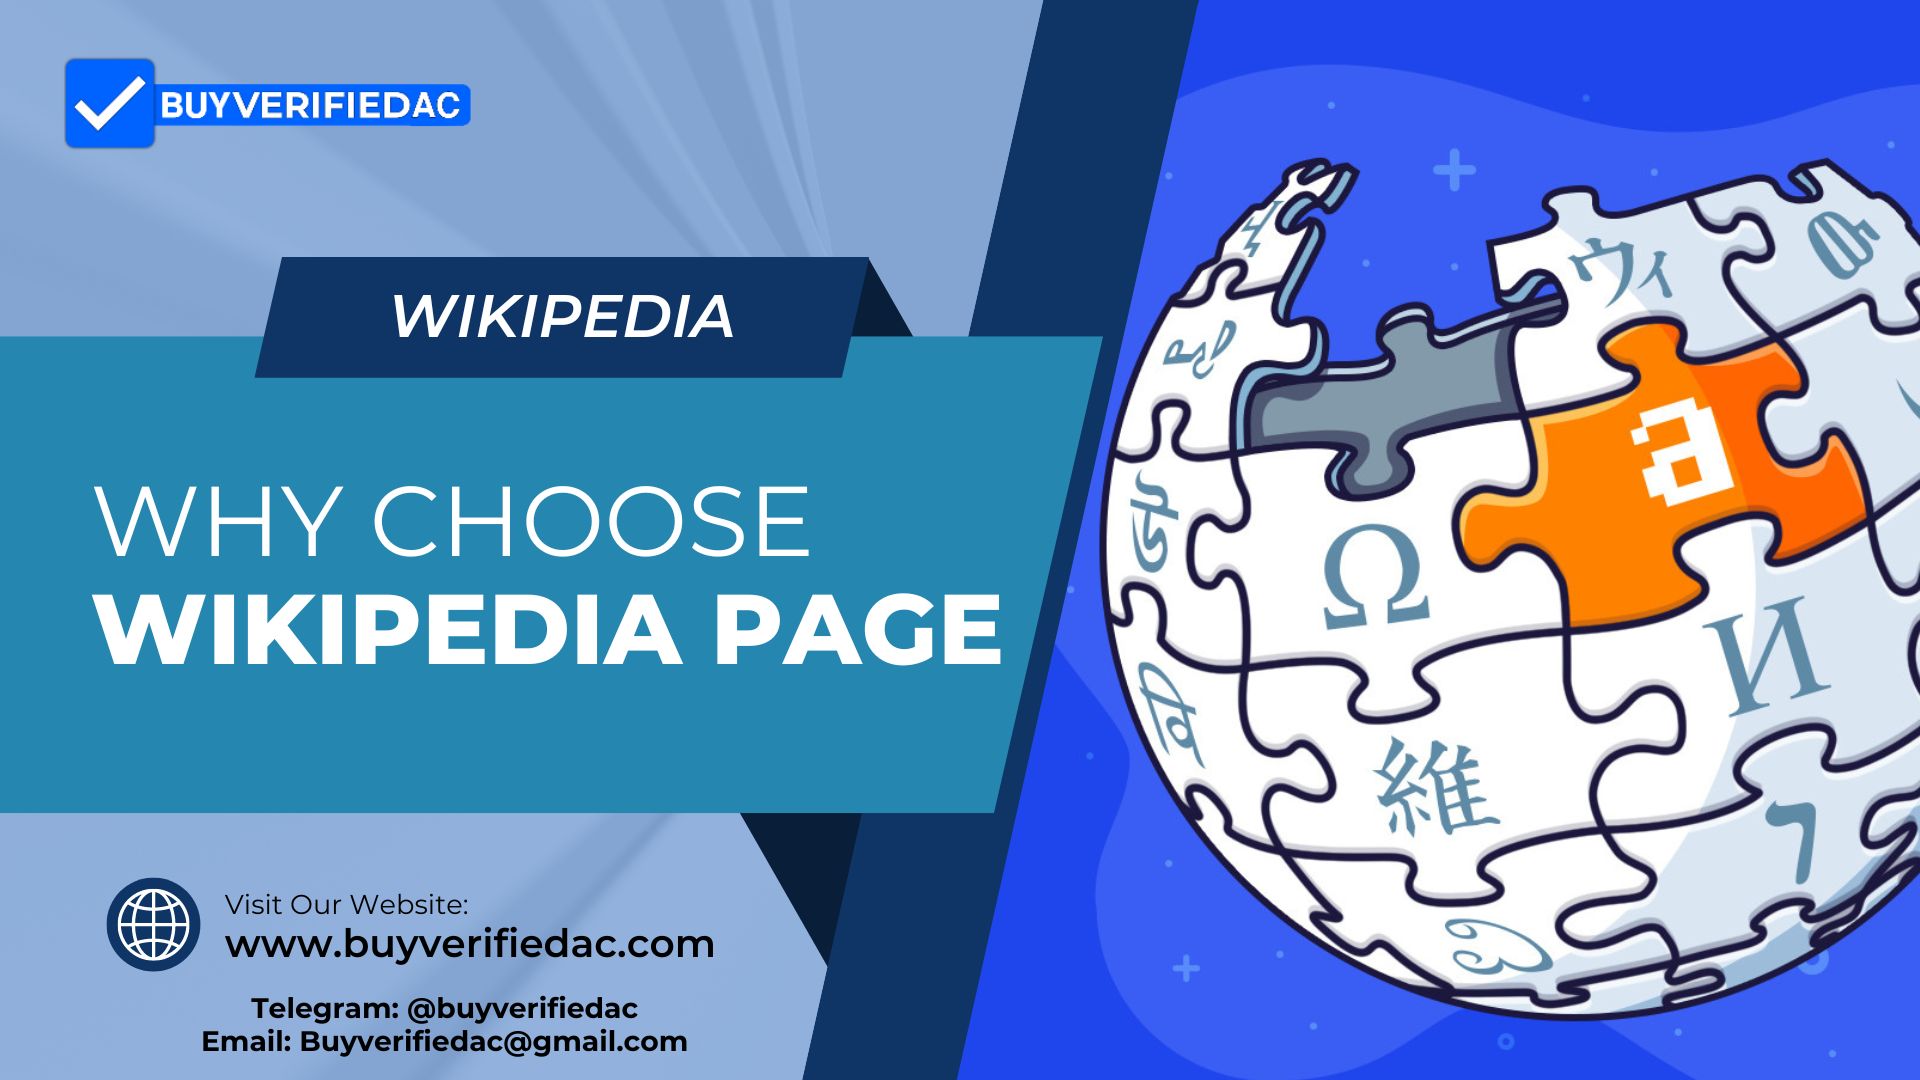 Why choose wikipedia page